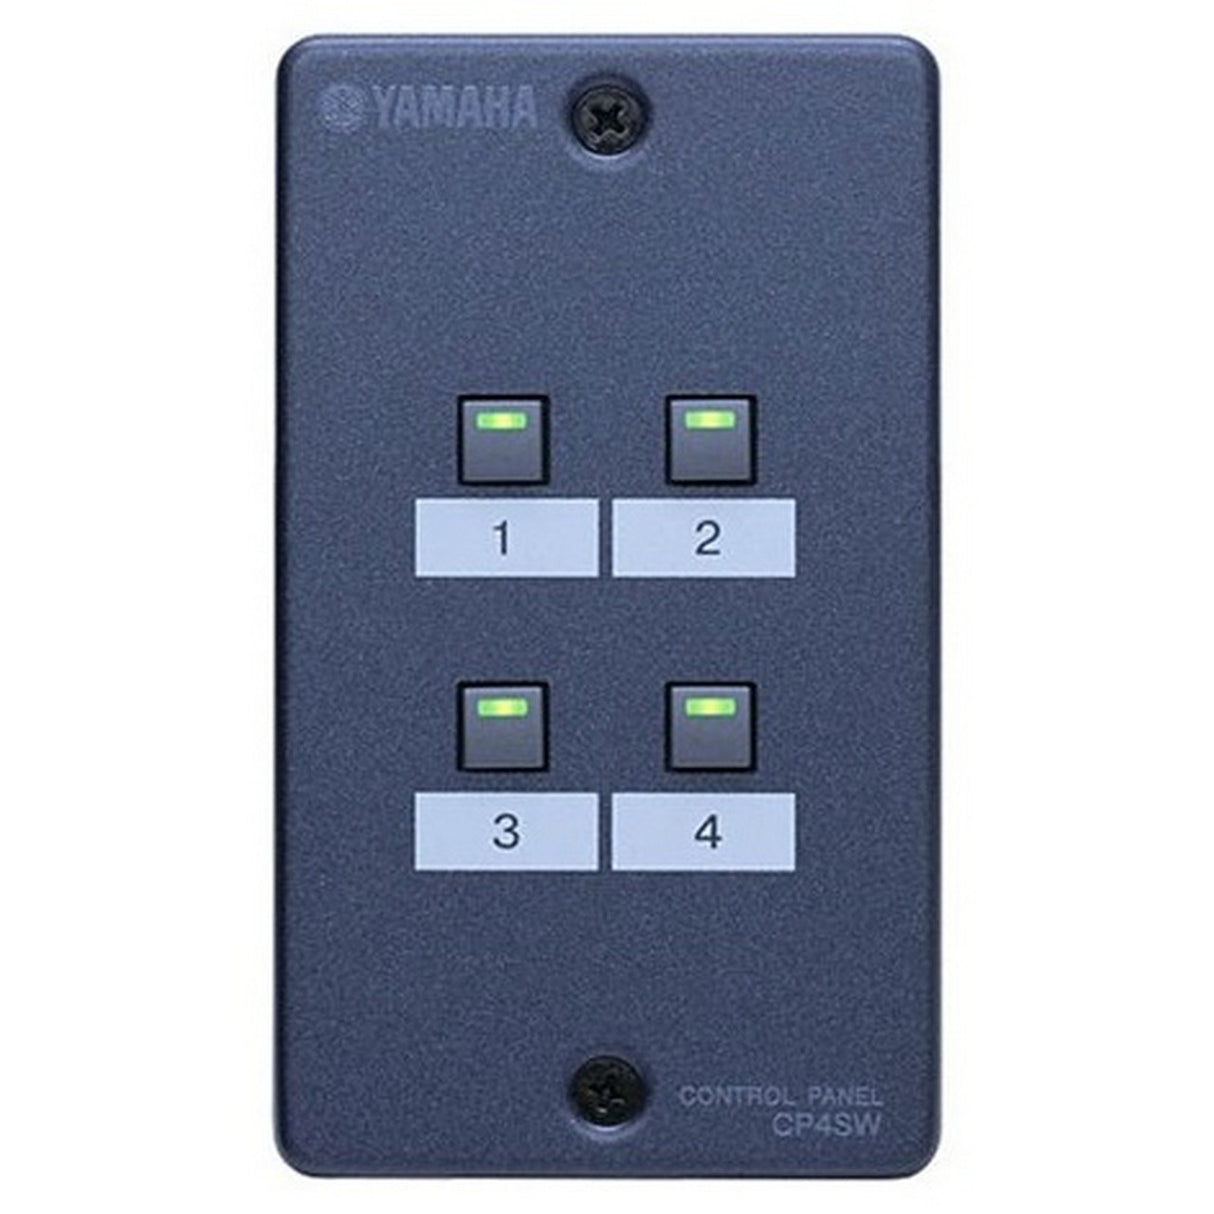 Yamaha CP4SW | GPI 4 Switch Wall Mount Control Panel